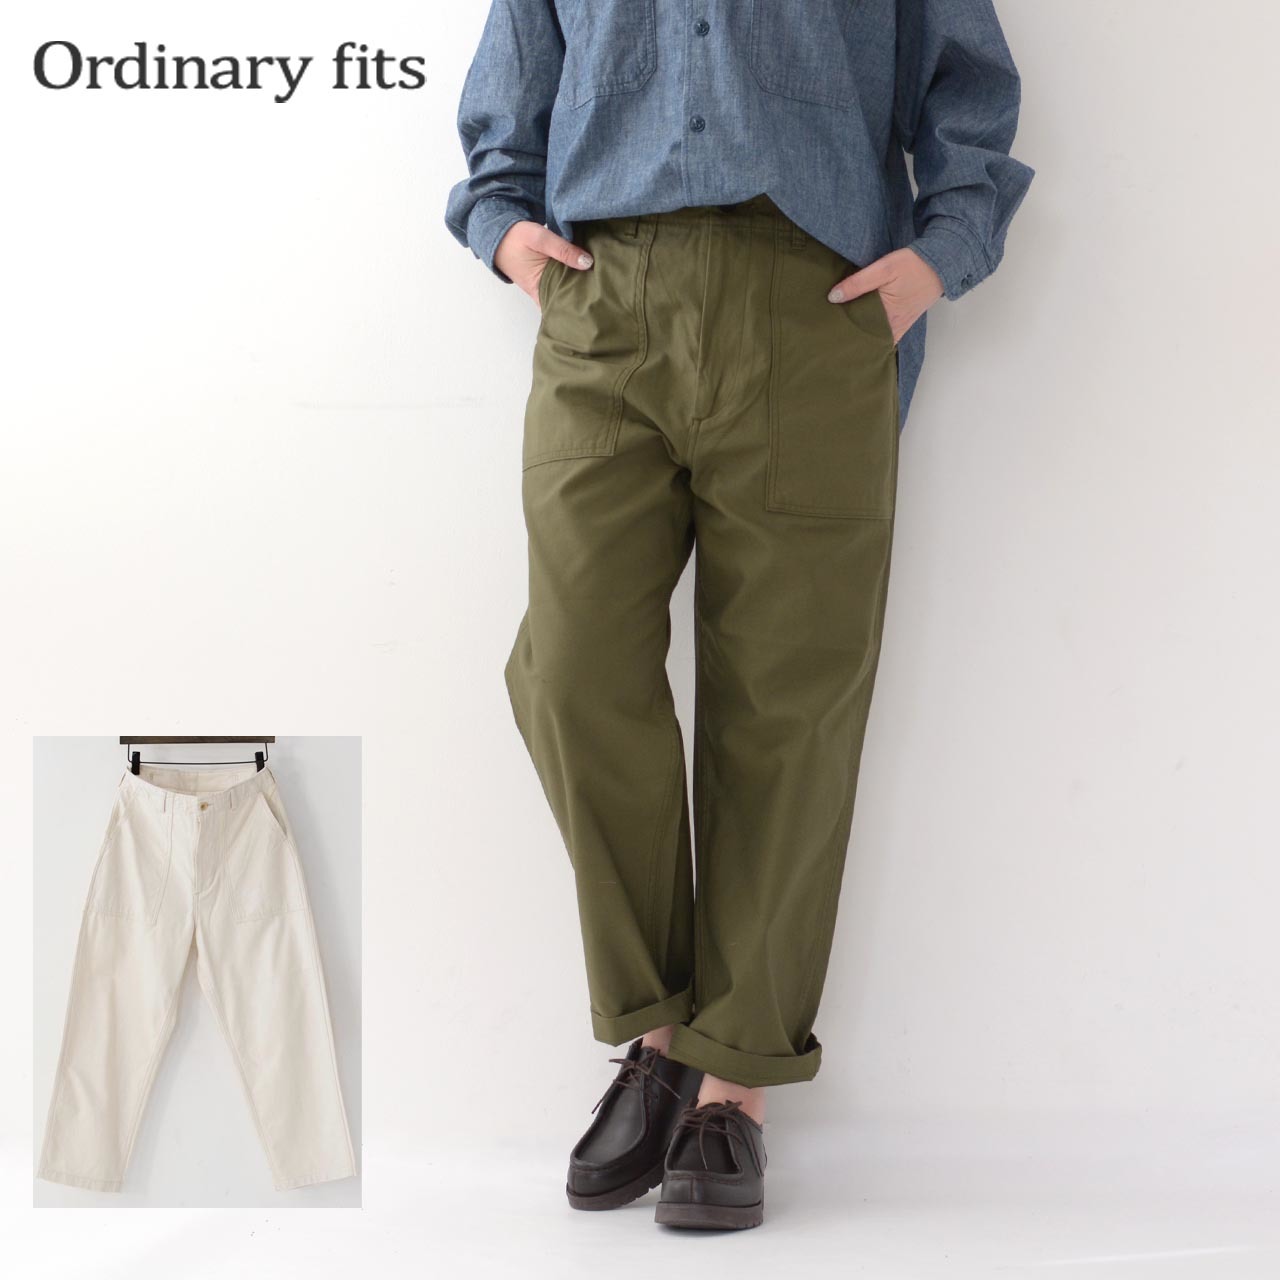 ordinary fits [オーディナリーフィッツ] BAKER PANTS [OF-P115]_f0051306_09215250.jpg